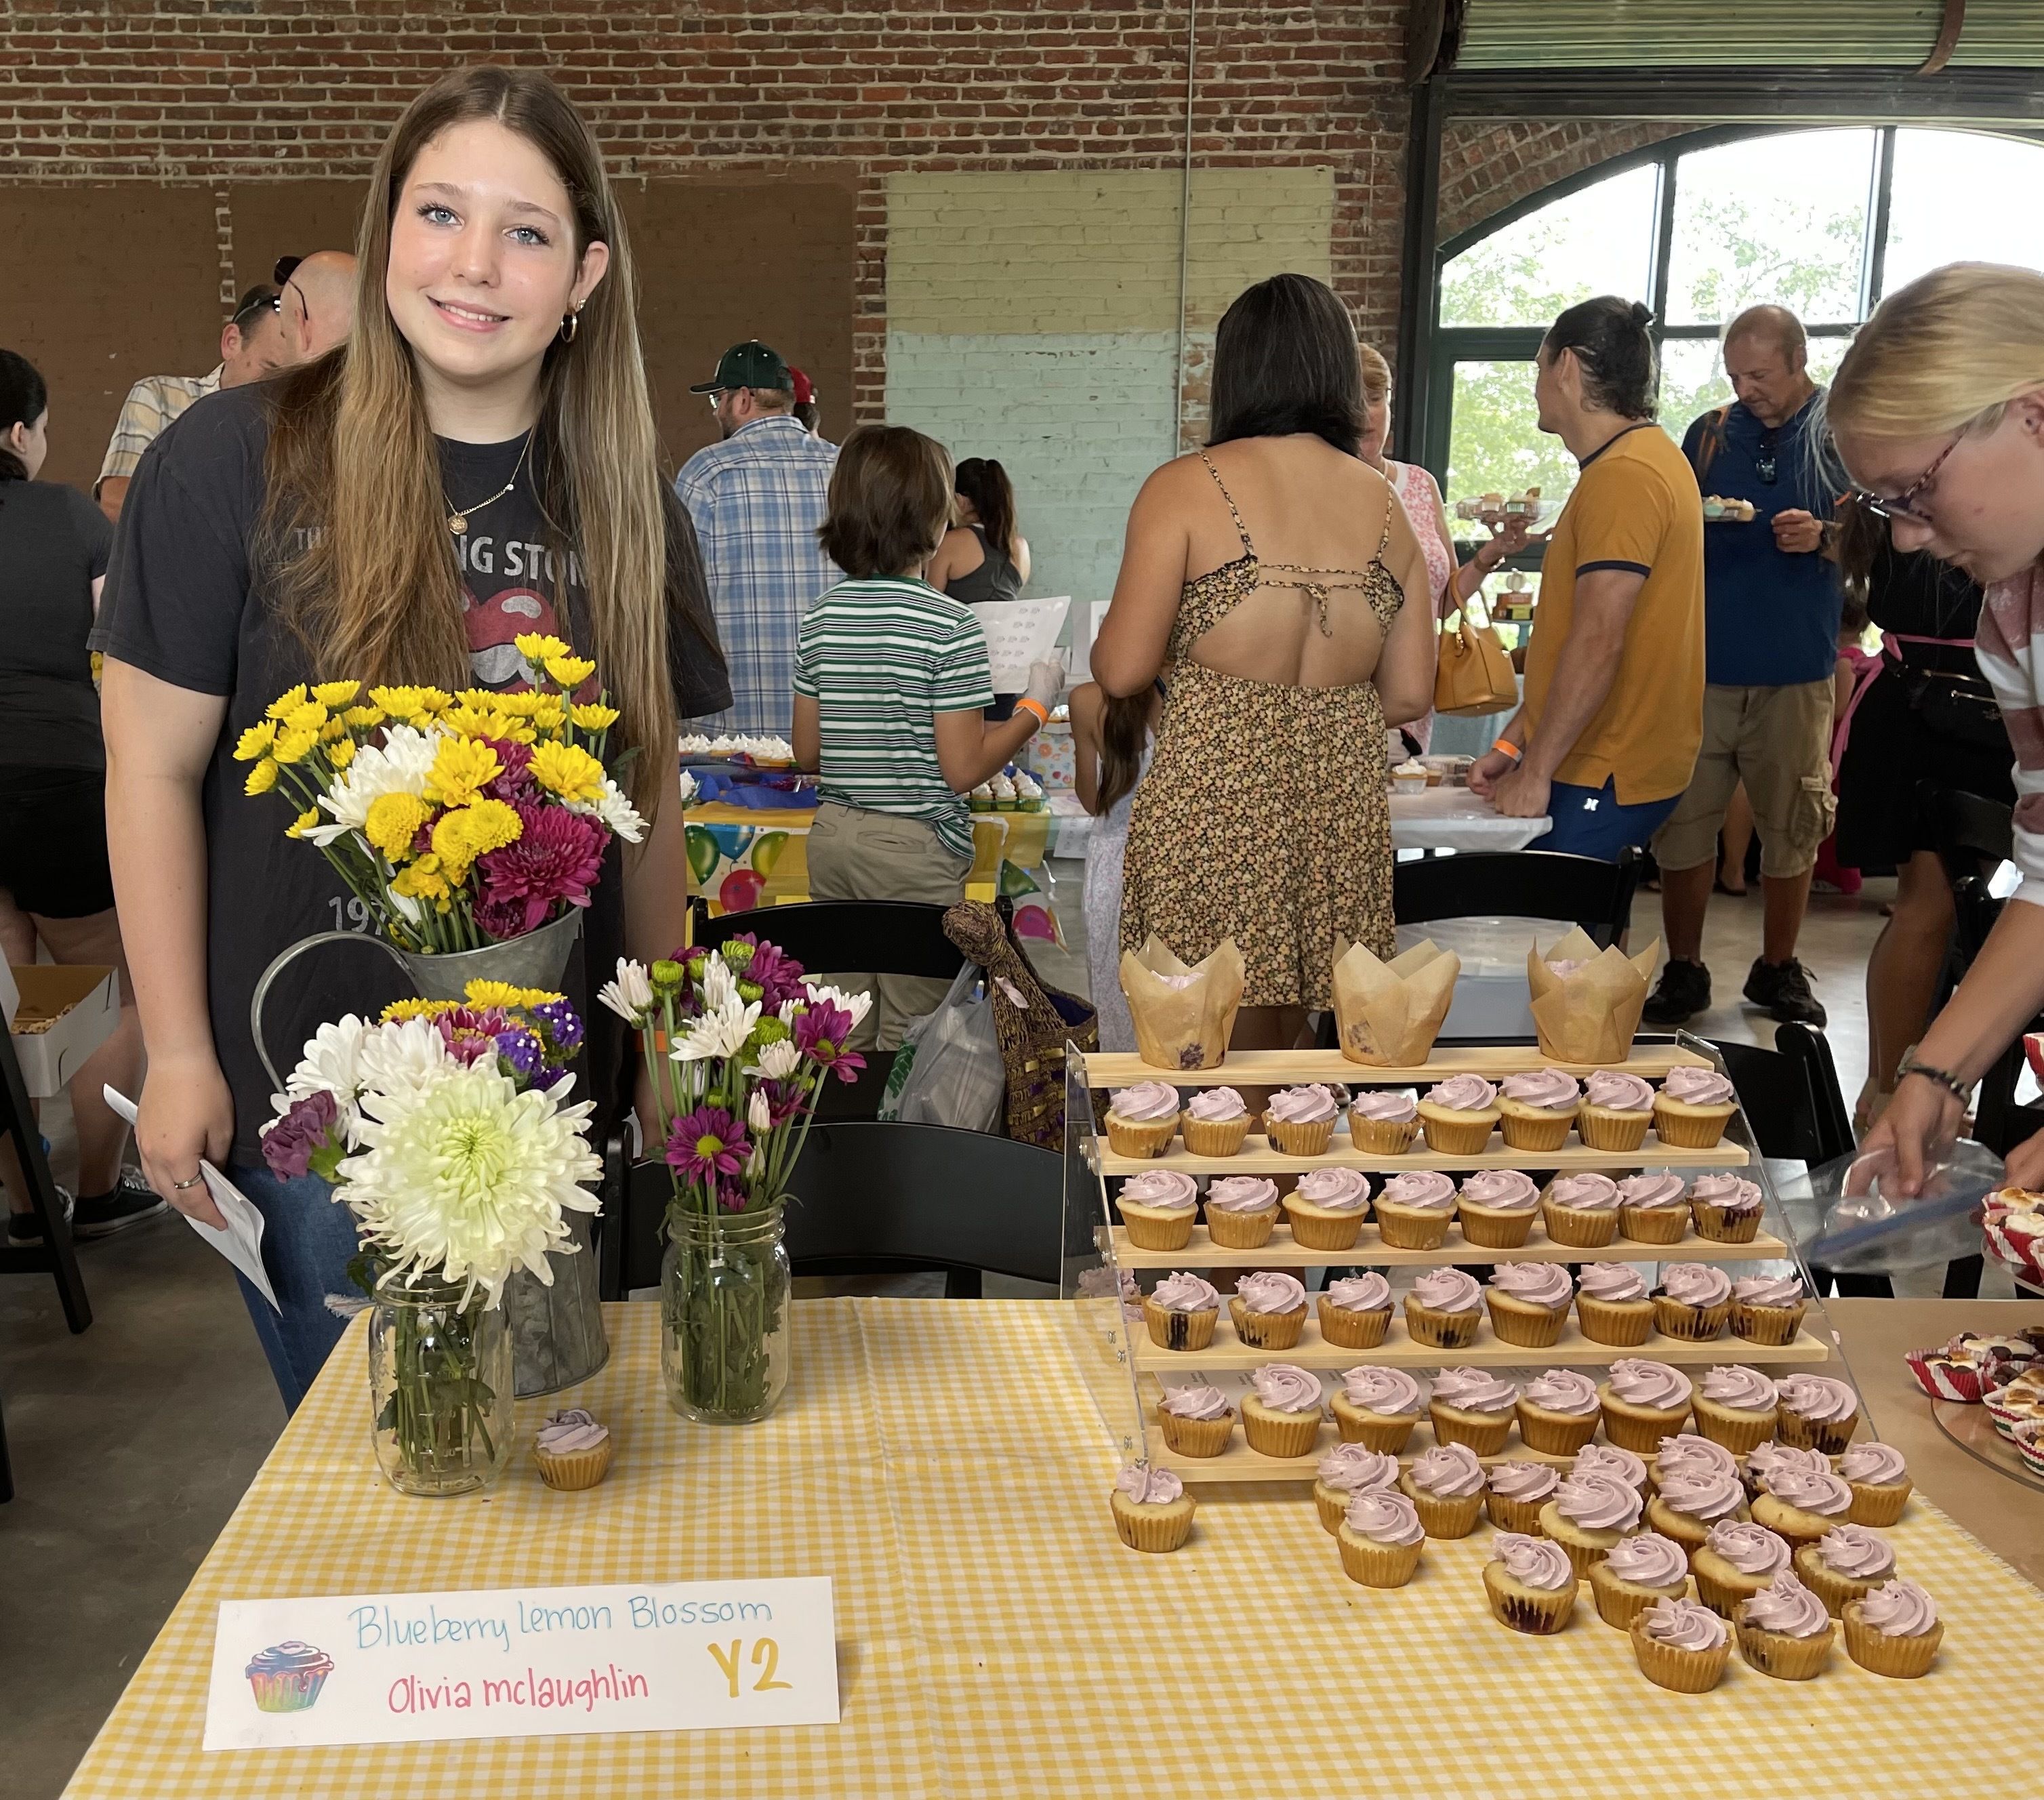 Olivia McLaughlin with her Blueberry Lemon Blossom cupcakes